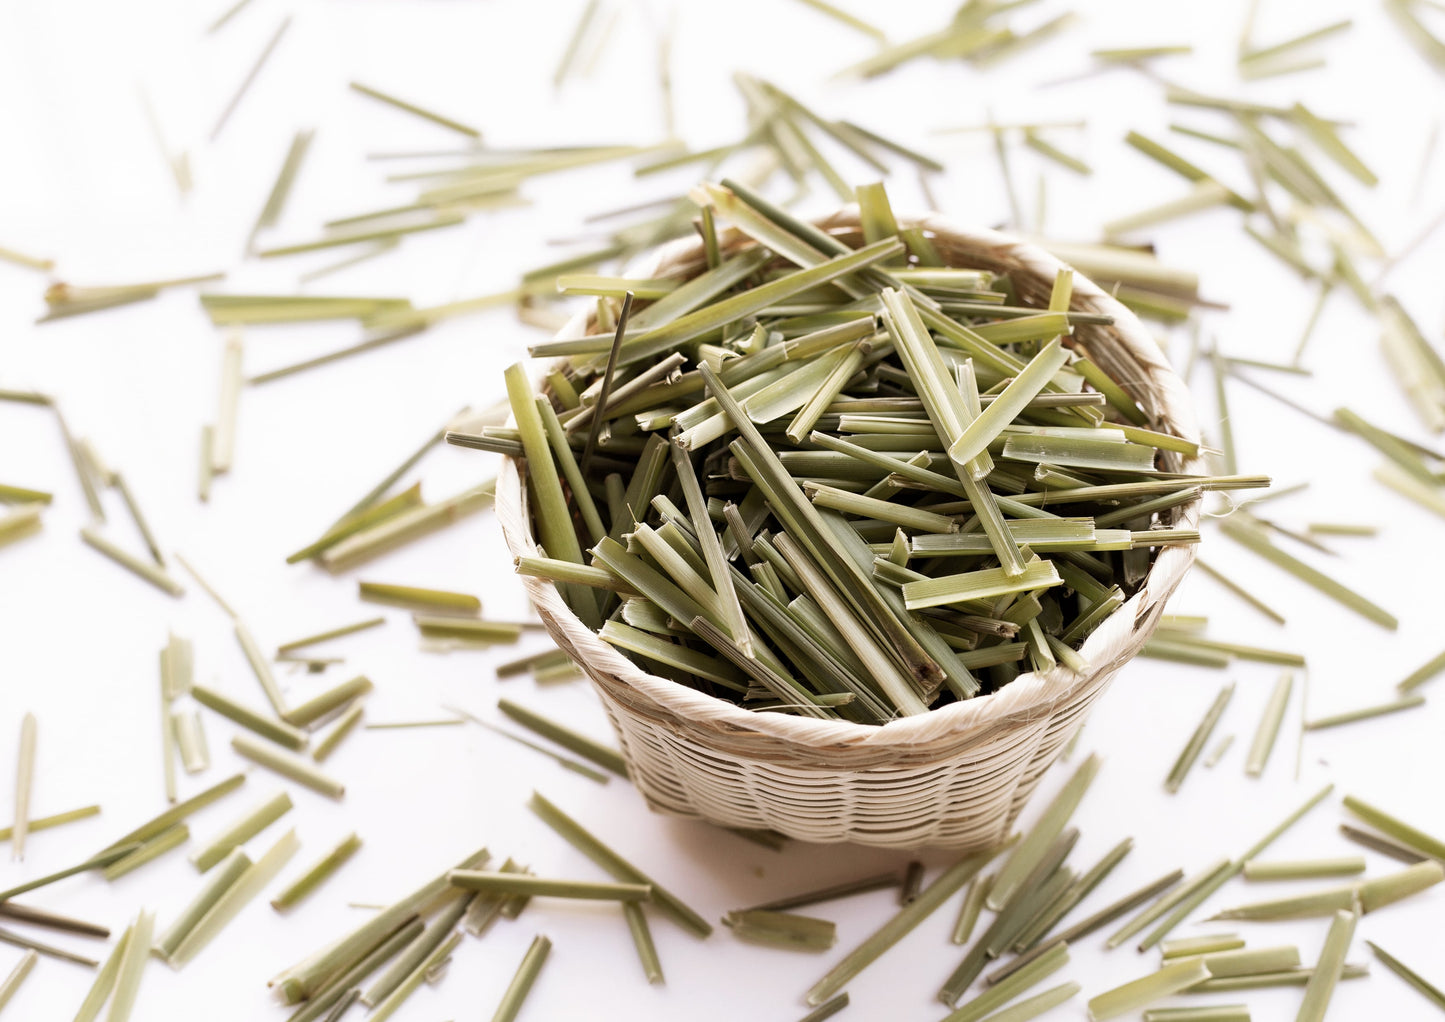 Dried Lemongrass Leaves – Cut Lemon Grass Herb, Vegan, Bulk. Lemony Flavor and Aroma. Rich in Vitamin C. Essential Ingredient for Thai, Indian, Indonesian Dishes. Perfect for Herbal Tea